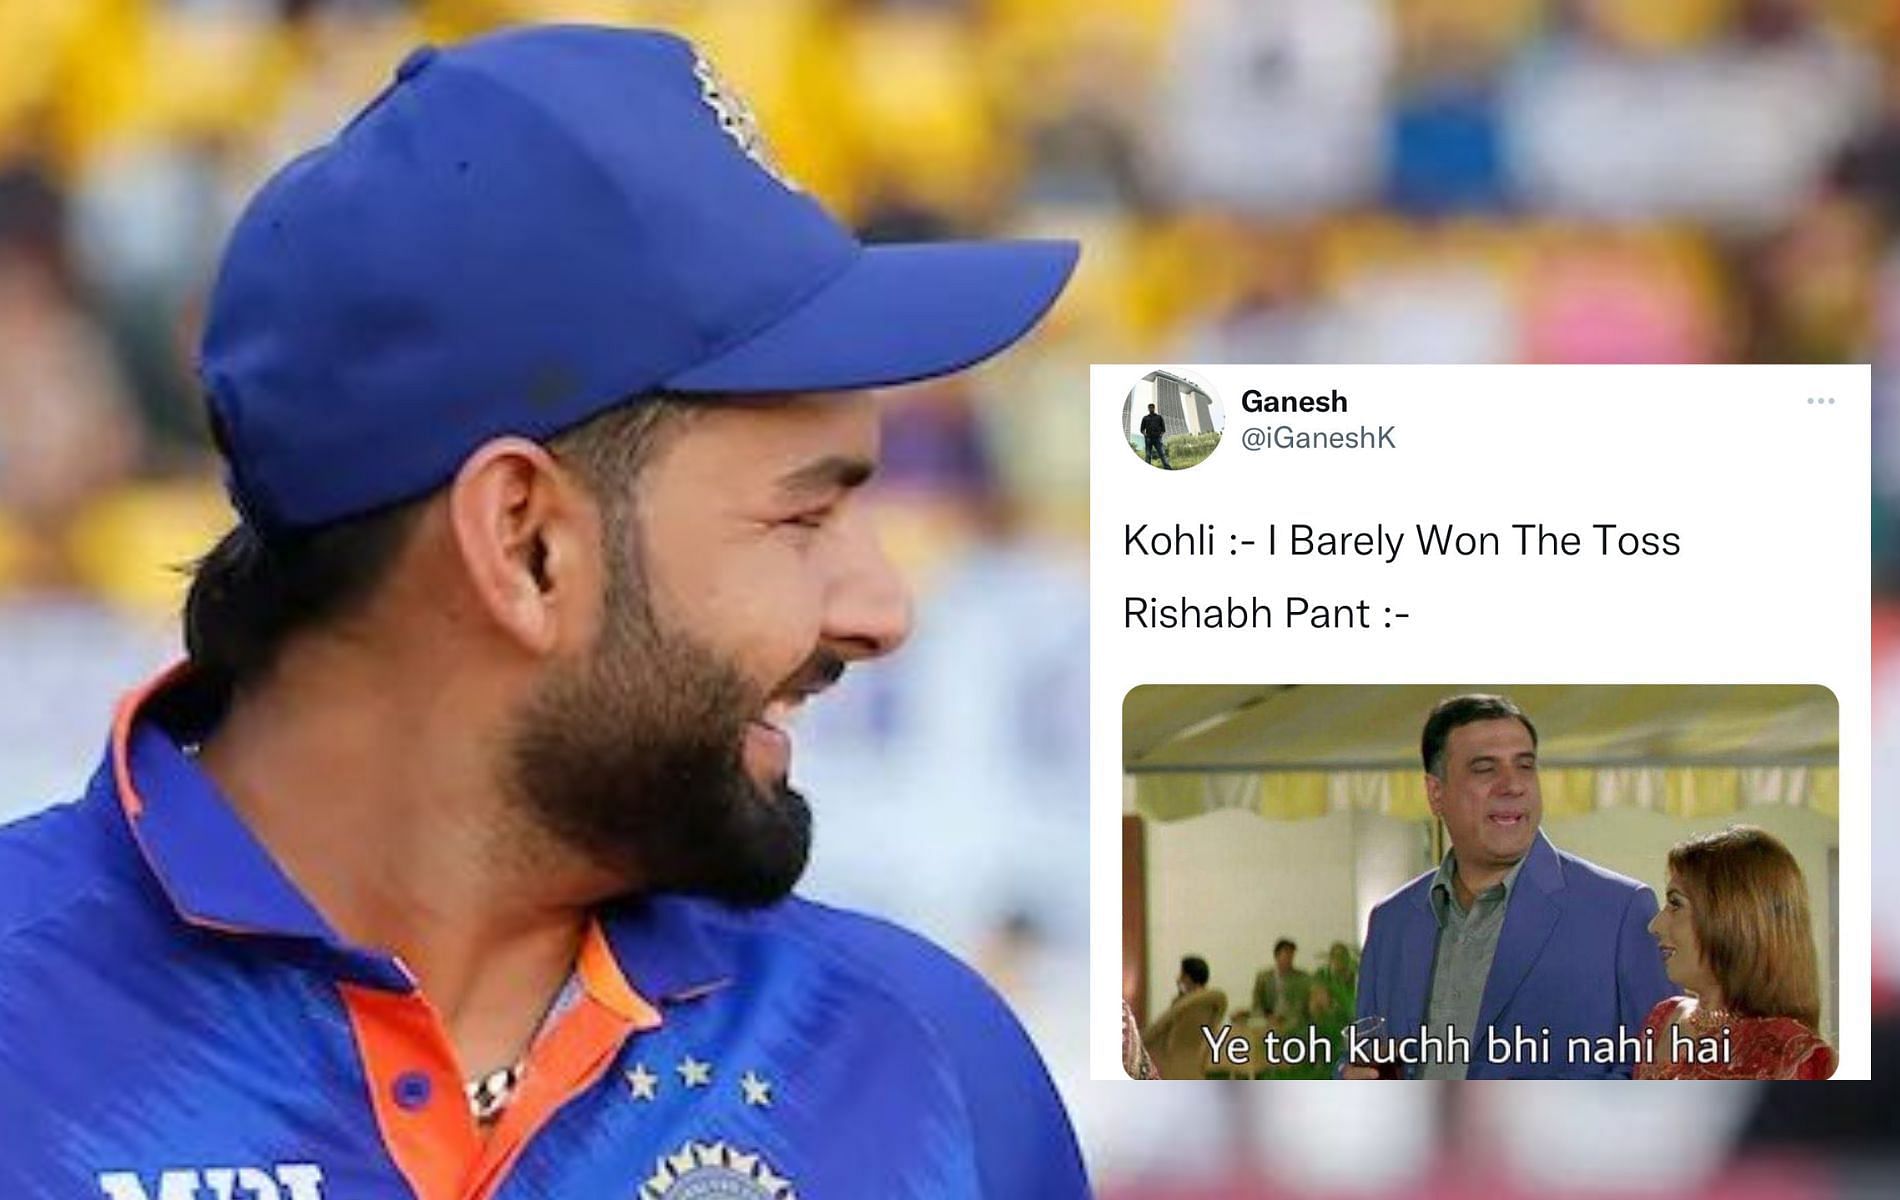 India vs South Africa 2022: Twitterati react after Rishabh Pant loses fifth successive toss in IND vs SA 2022 series